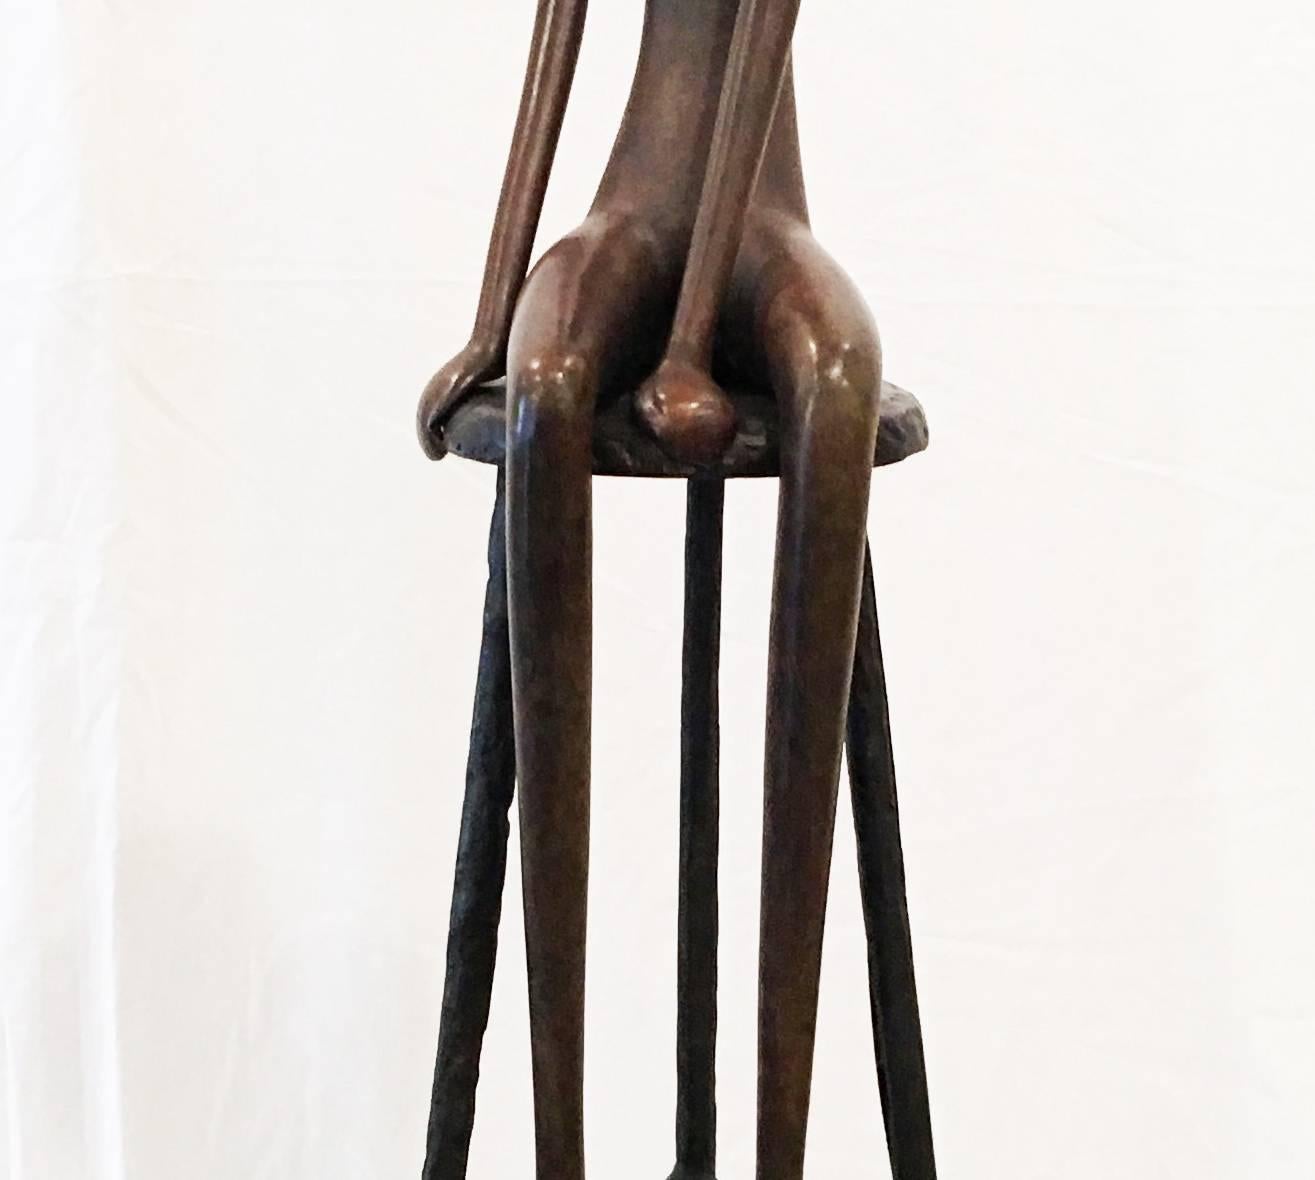 Man on Stool, Bronze Sculpture - Edition 7 of 25 - Gold Figurative Sculpture by Ruth Bloch